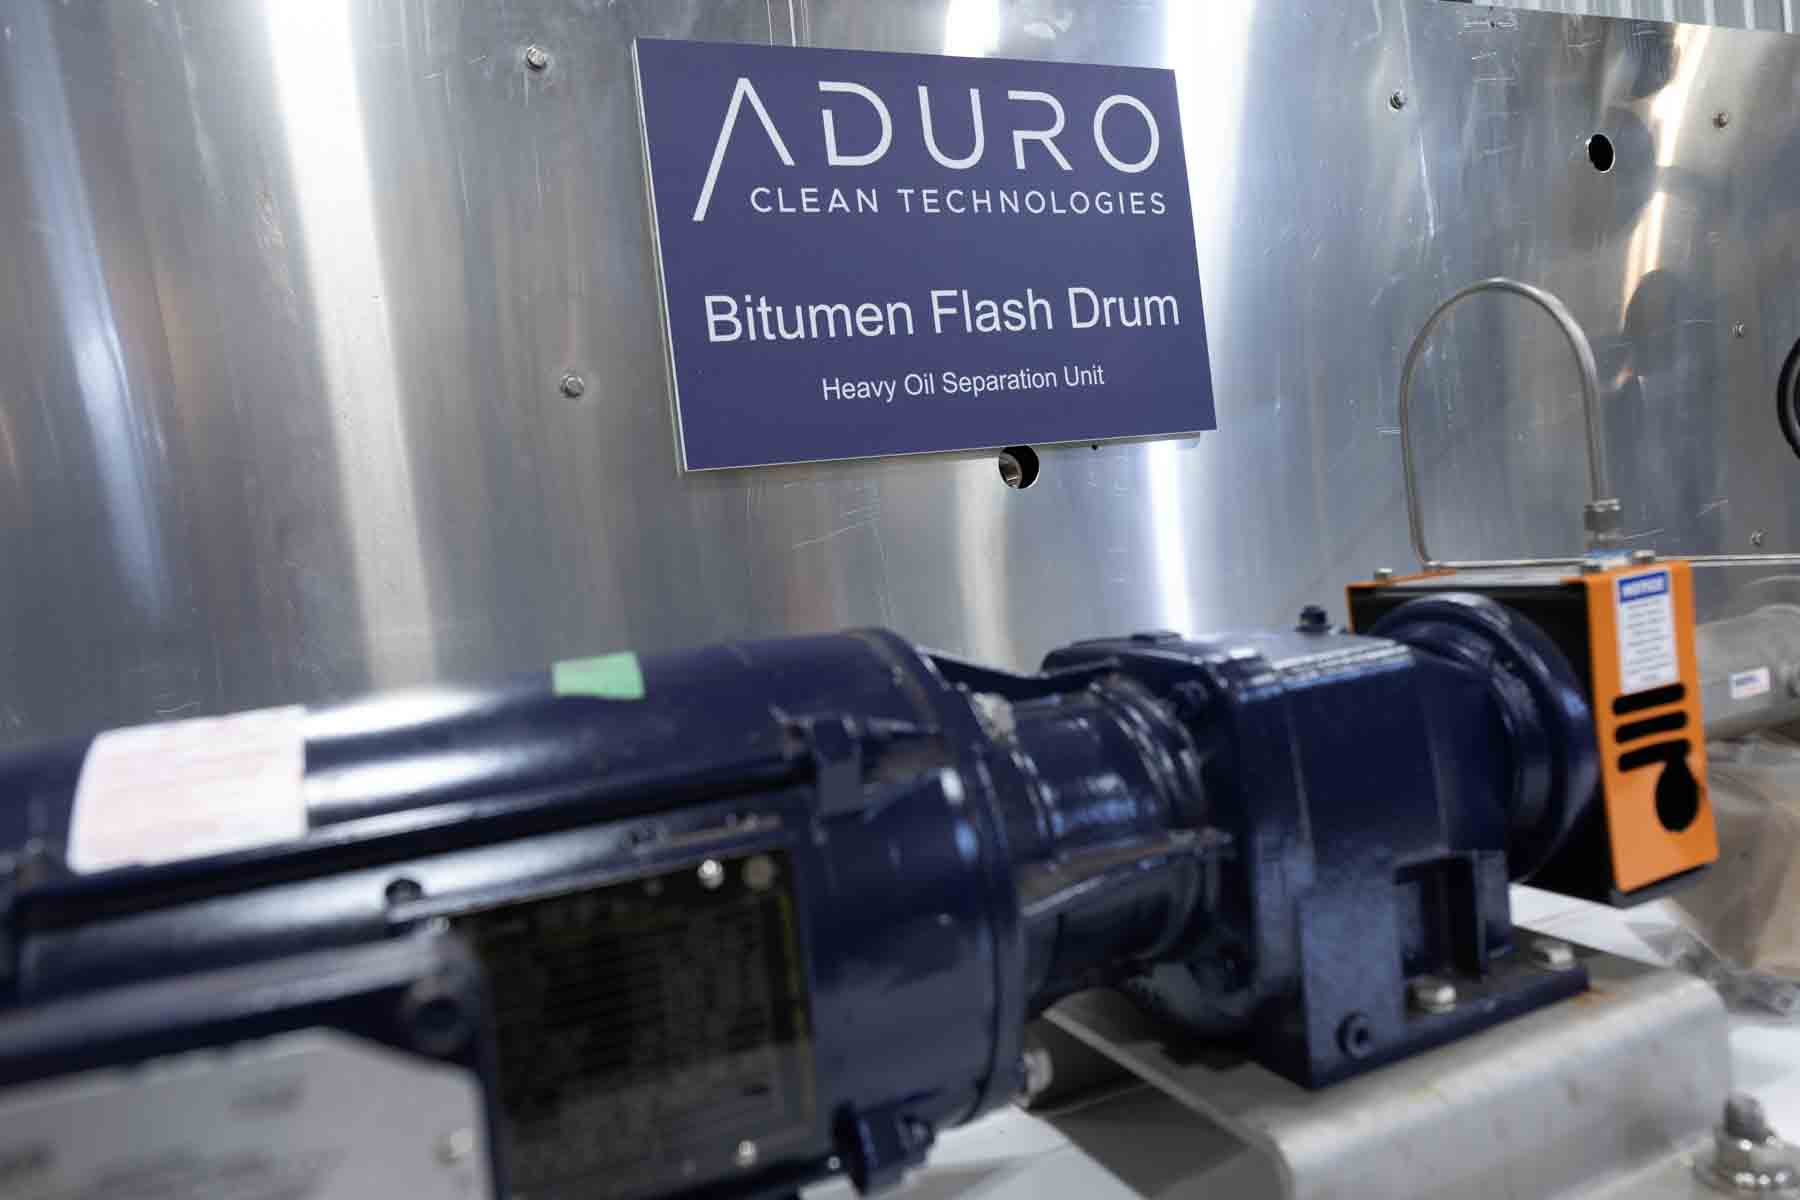 Industrial equipment with a sign indicating bitumen flash drum